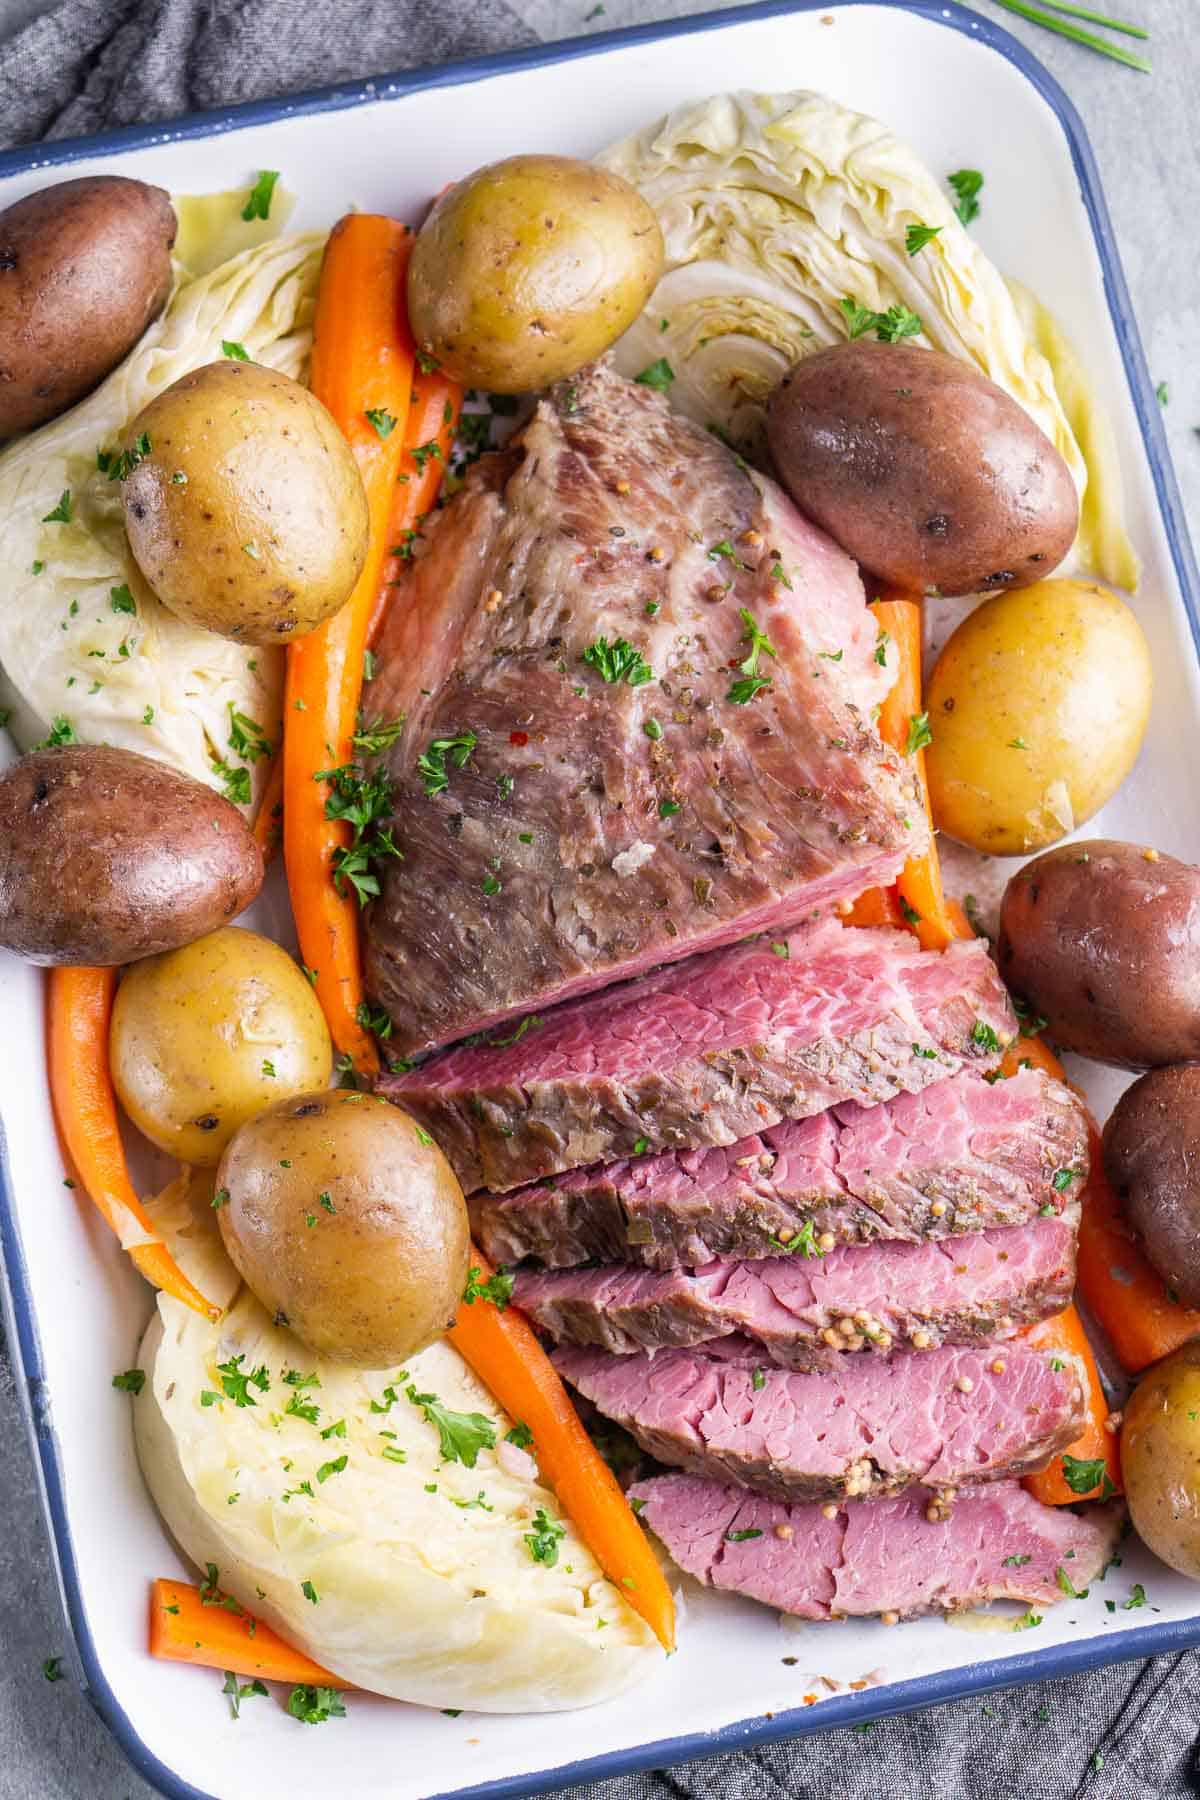 Sliced corned beef in pan, surrounded by whole potatoes, carrots, and cabbage